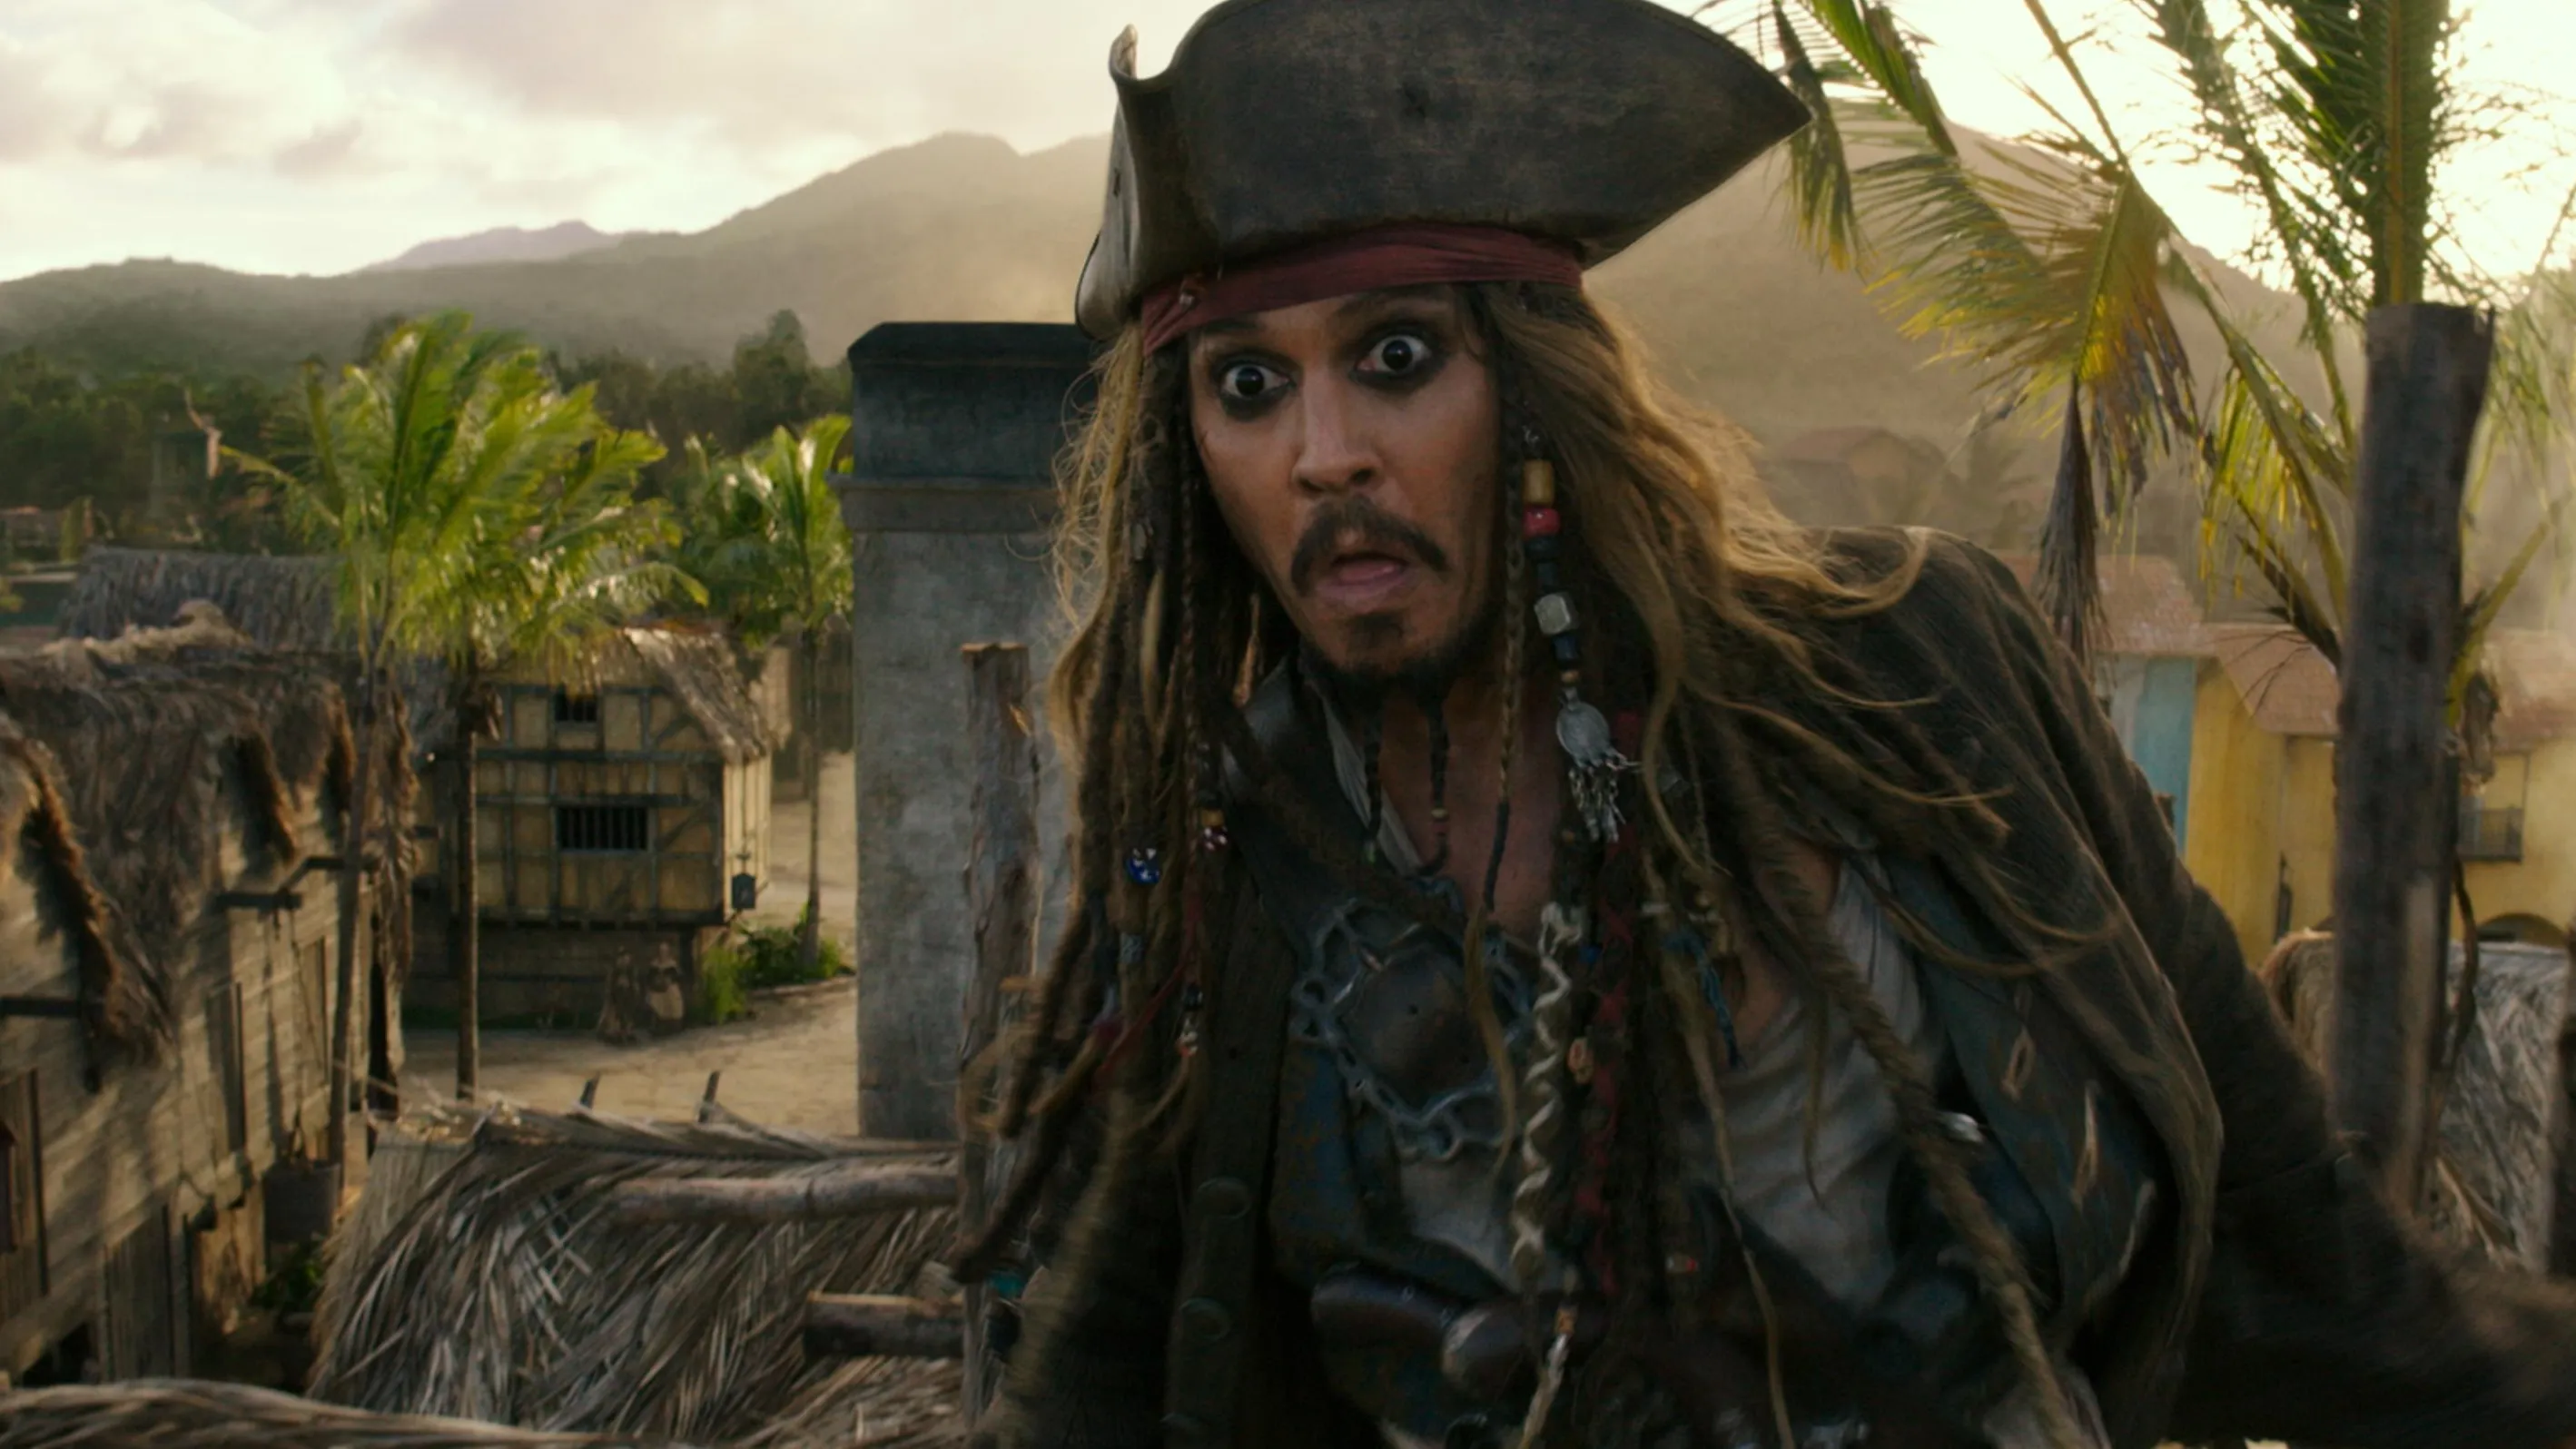 Report: Johnny Depp Open to Working With Disney Again